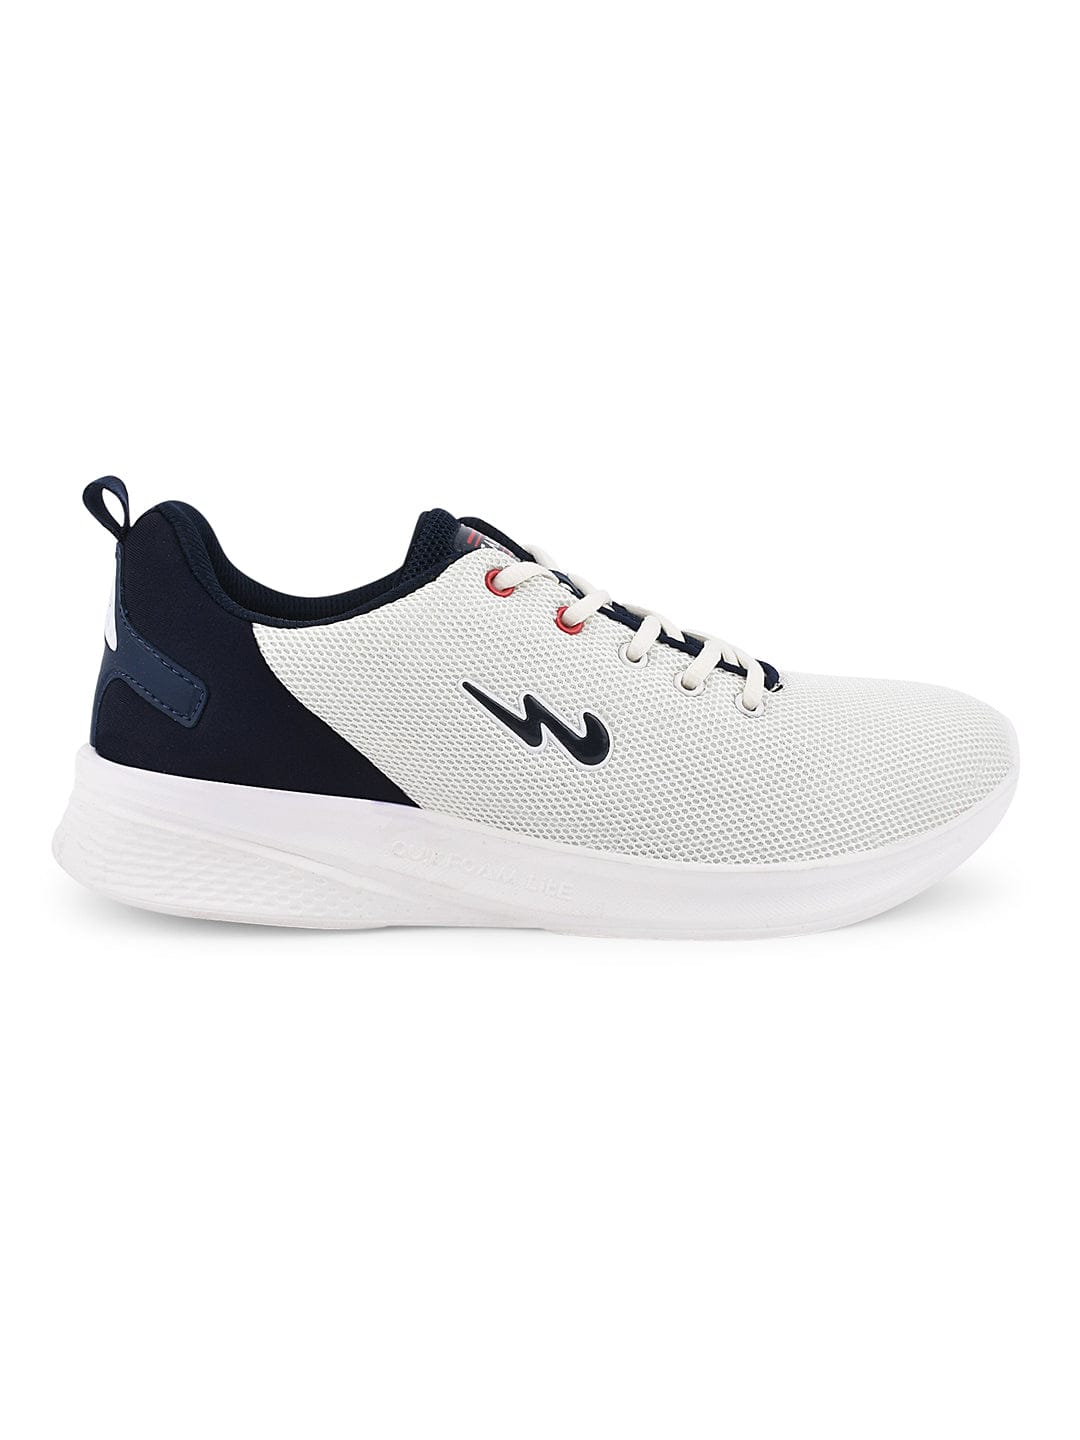 Buy TOWN Blue Men's Running Shoes | Shoes